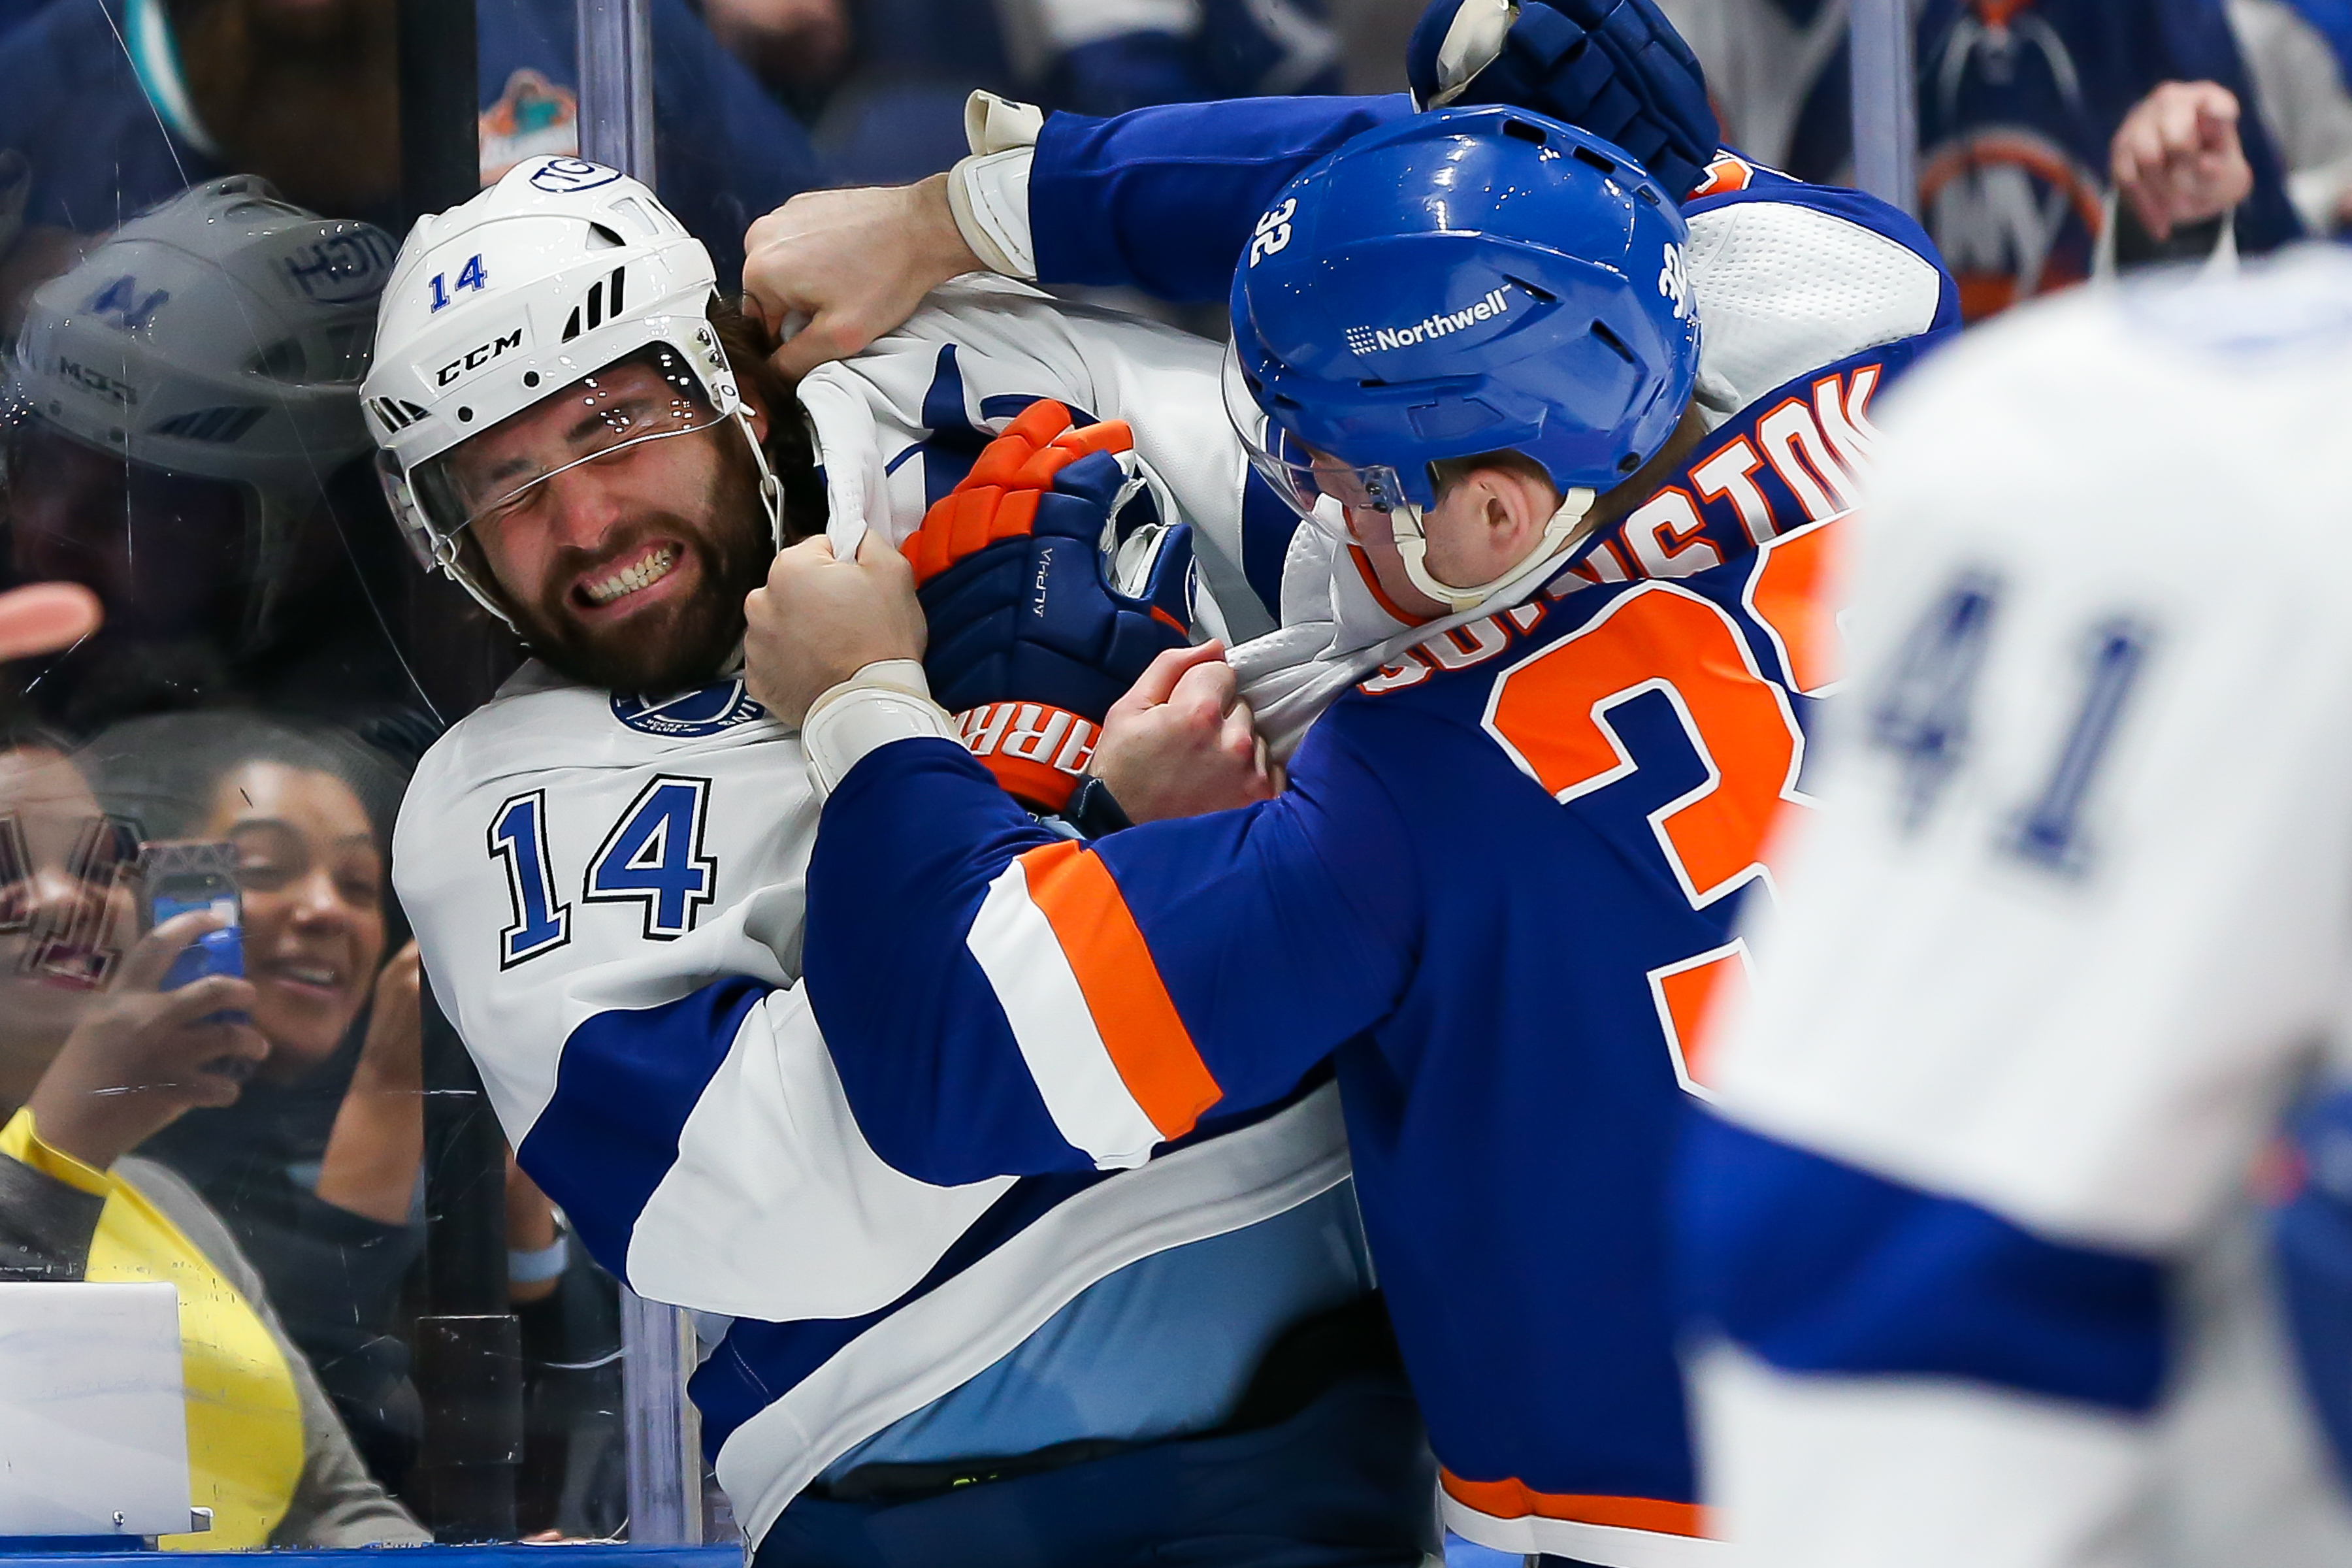 Pat Maroon Signed by the Tampa Bay Lightning - Last Word On Hockey